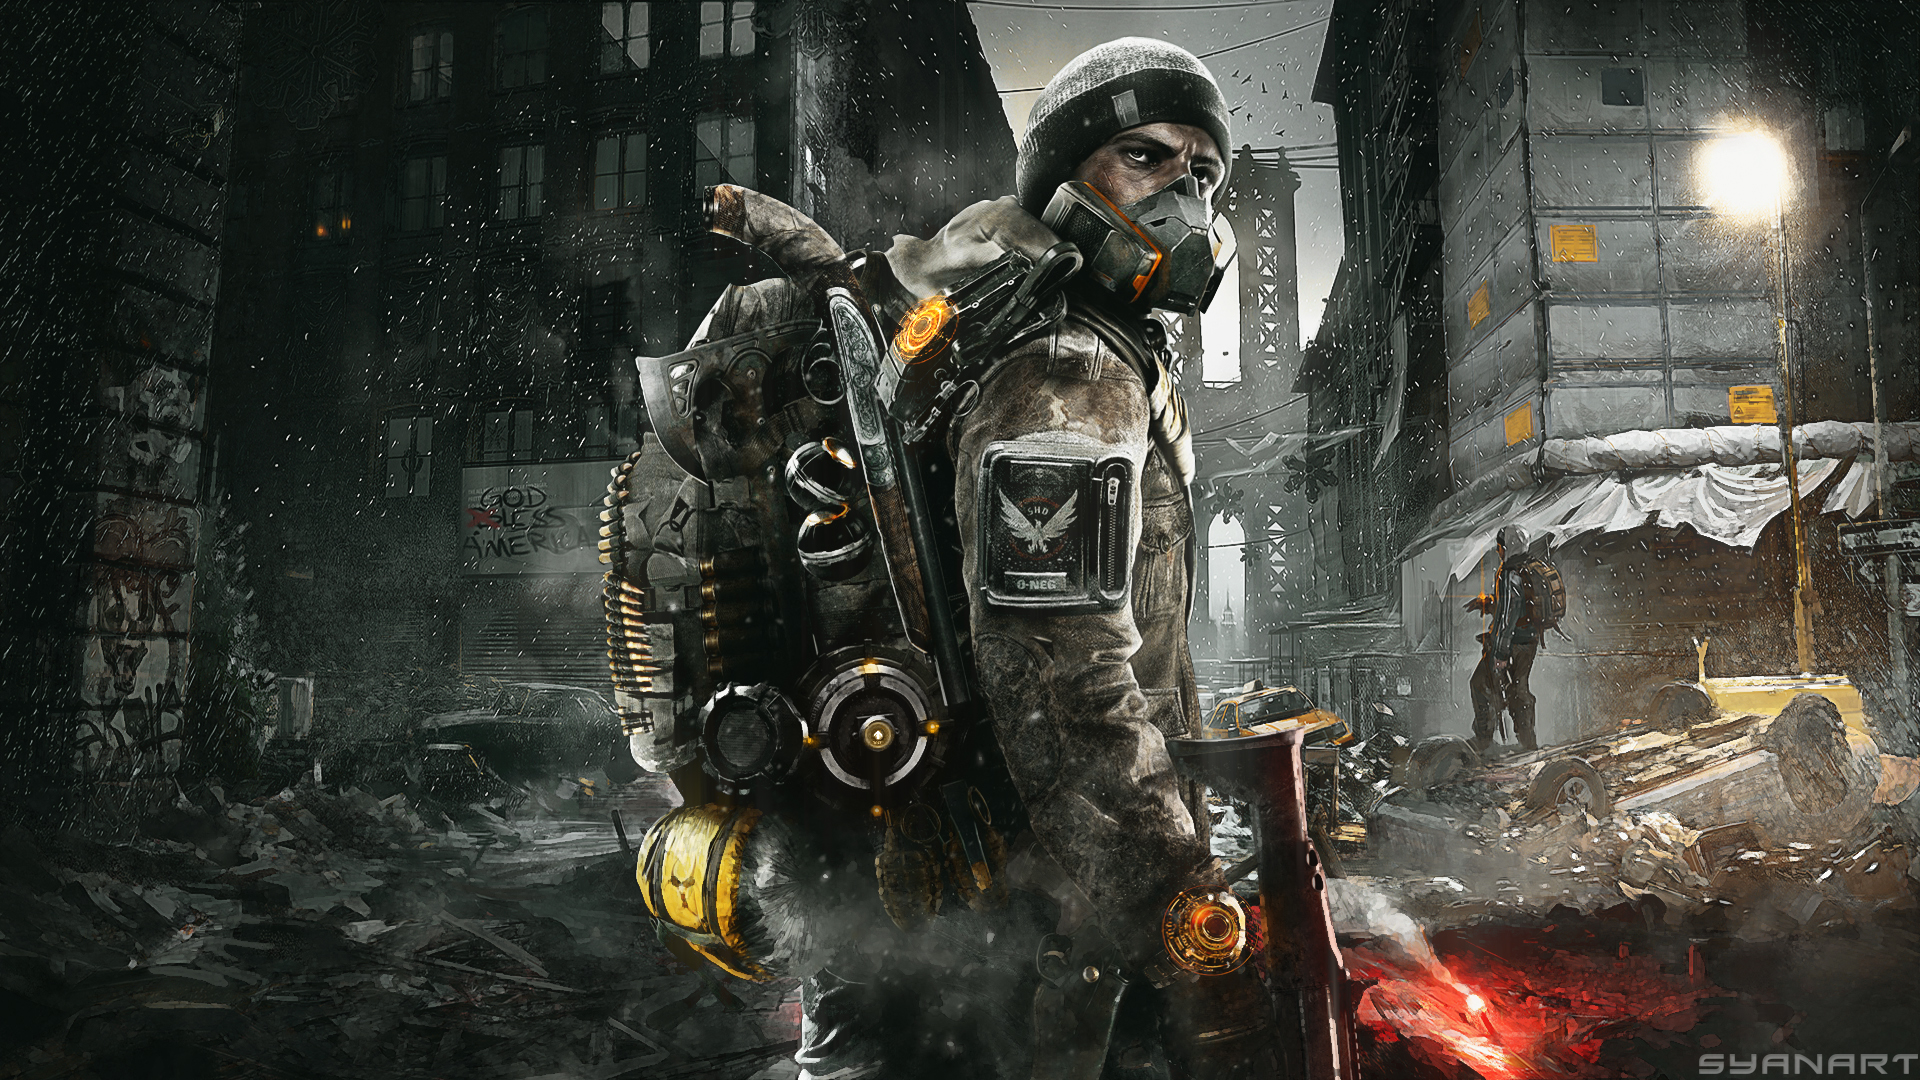 Tom Clancys The Division Video Games Apocalyptic Futuristic Video Game Art 1920x1080